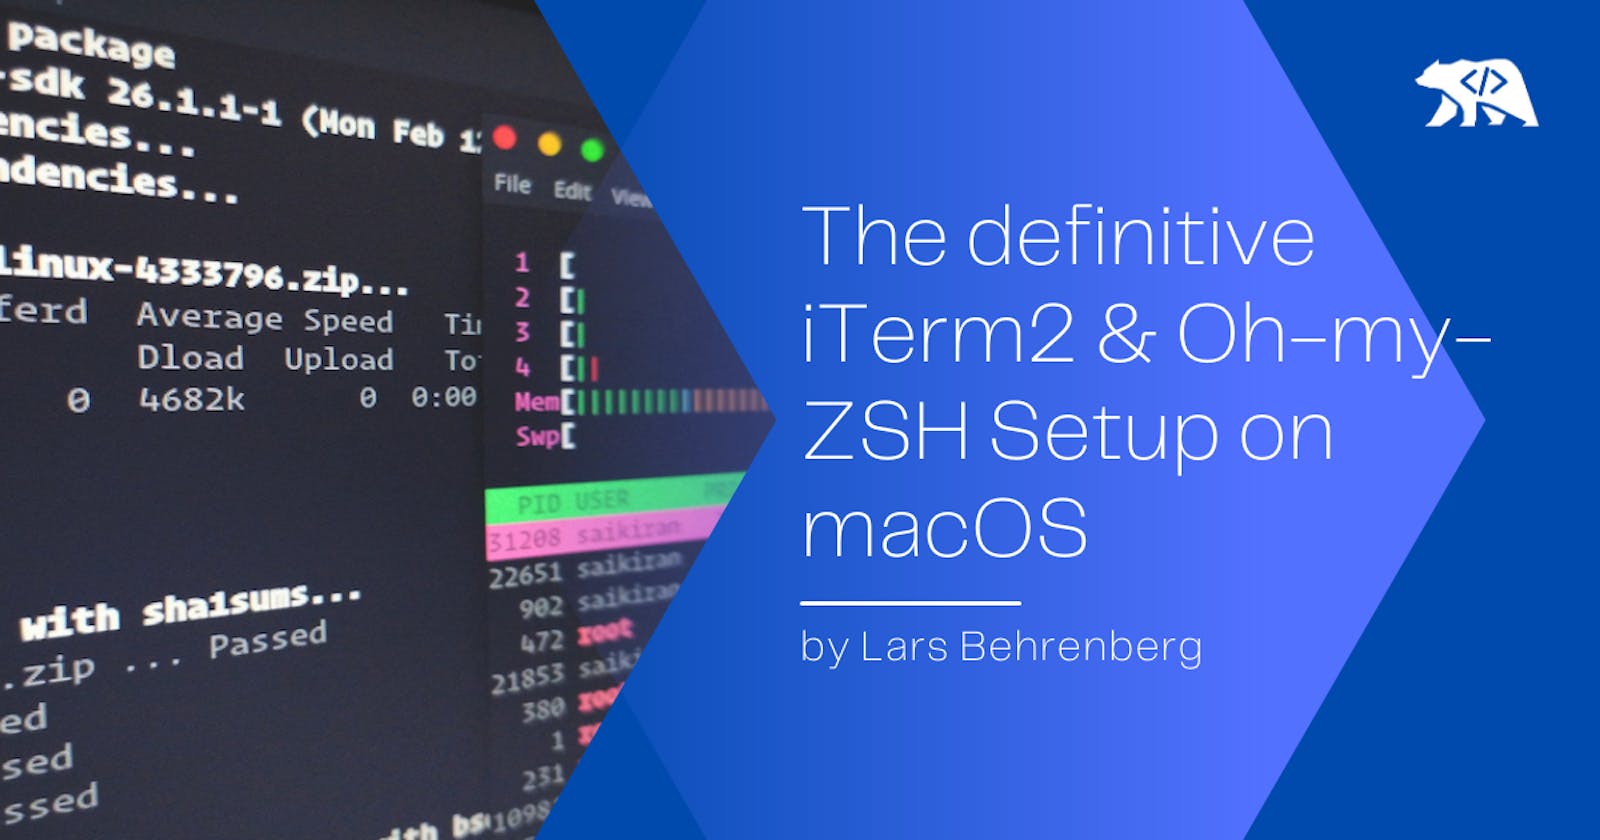 The definitive iTerm2 & Oh-my-ZSH Setup on macOS